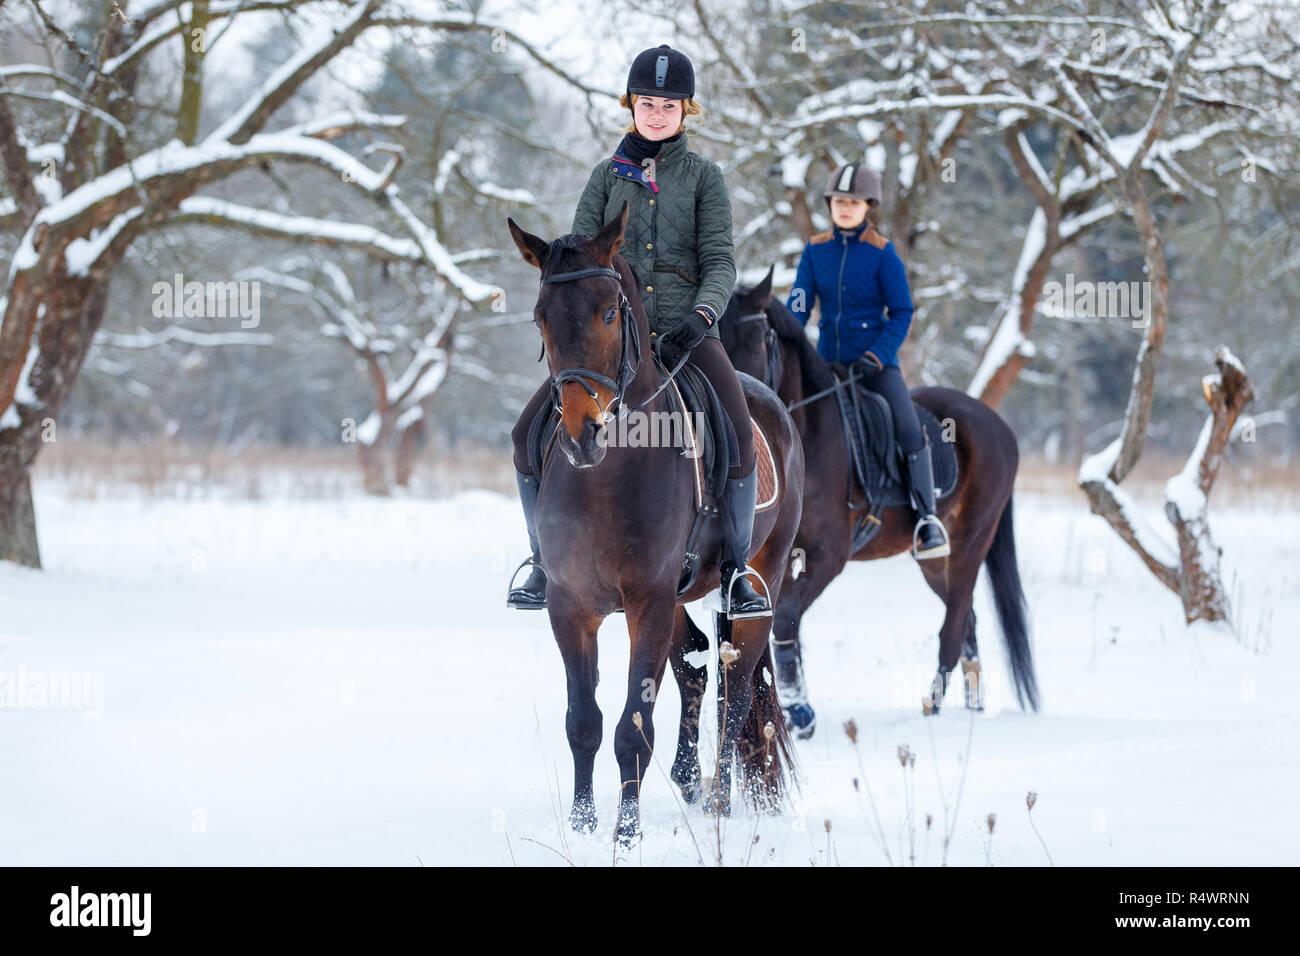 Two young women riding horses in winter park. Stock Photo